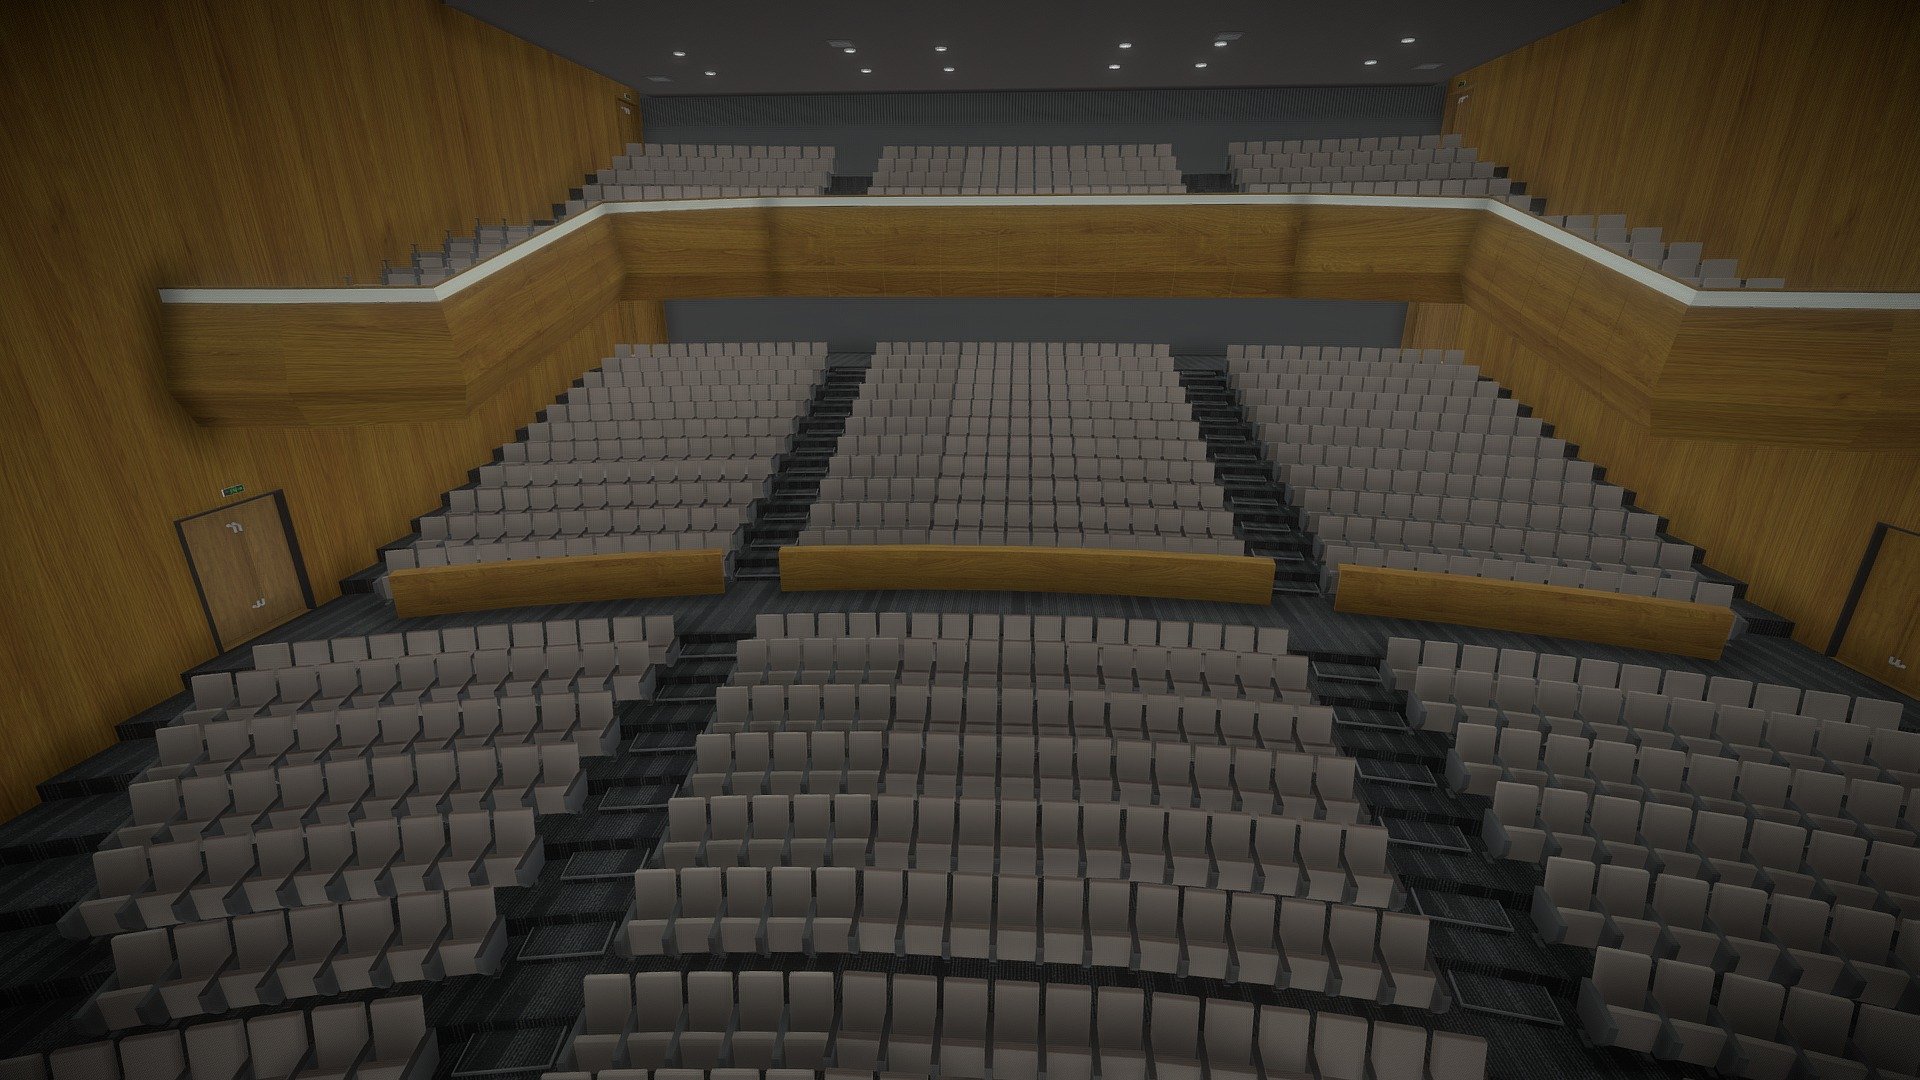 This is a music opera house, including light texture model. You can reuse scenes, render settings, lights, and materials, but most importantly, you can learn from files, move through projects, learn how to create and use lights, and develop materials and their uses. Each texture works in it, and so does the value of each fill option. This phase was created in 20143dmax and saved in the 2014 version. Contains FBX format files. Allows texture folders to reuse scenes, render settings, lights, and materials. Open the file and start rendering. Polygon: 563870 parts, vertex: 363135 3d model